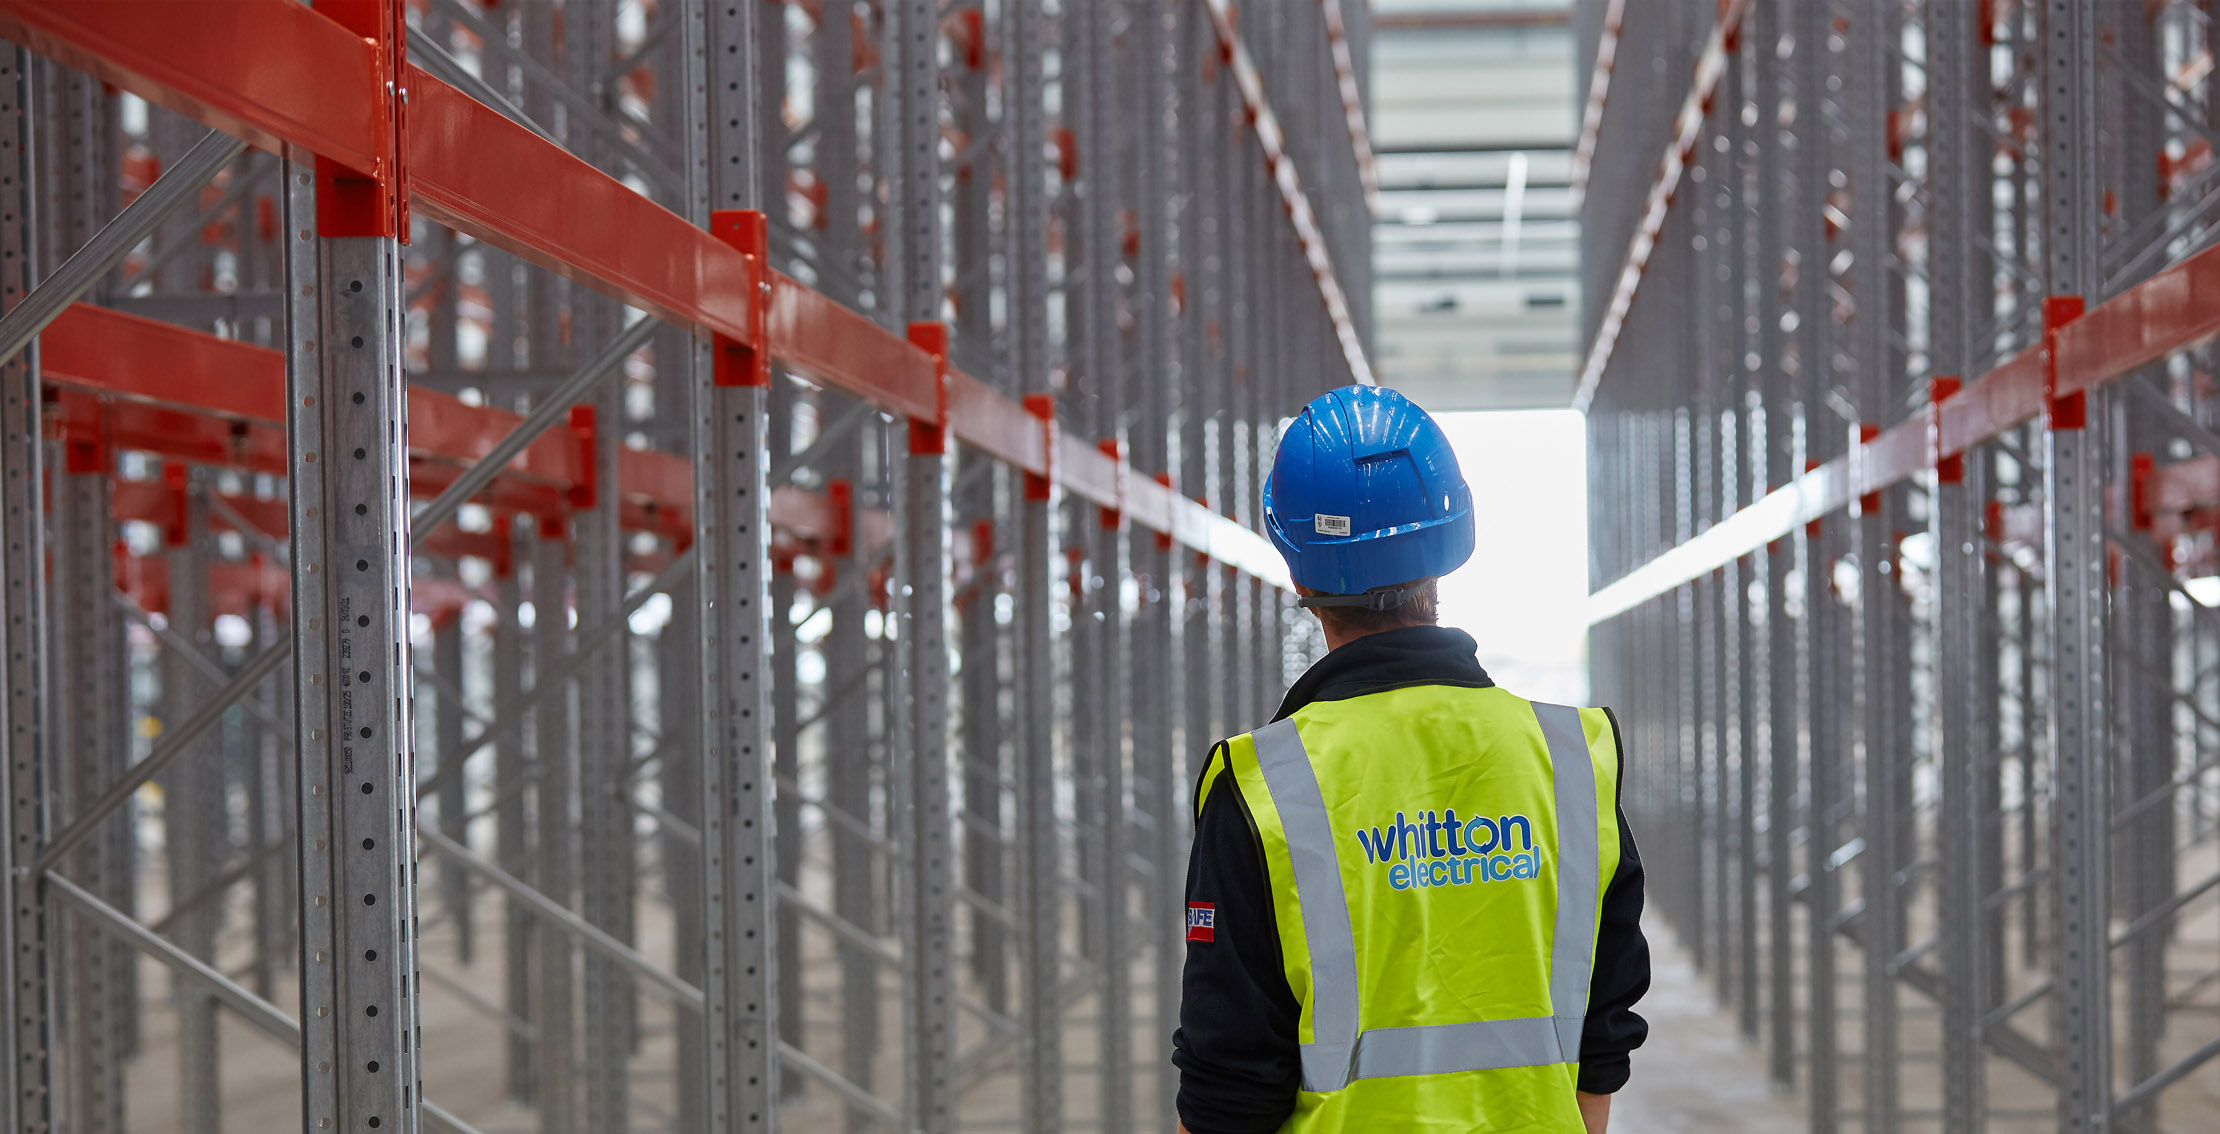 A Whitton Electrical engineer inspecting lighting between racking